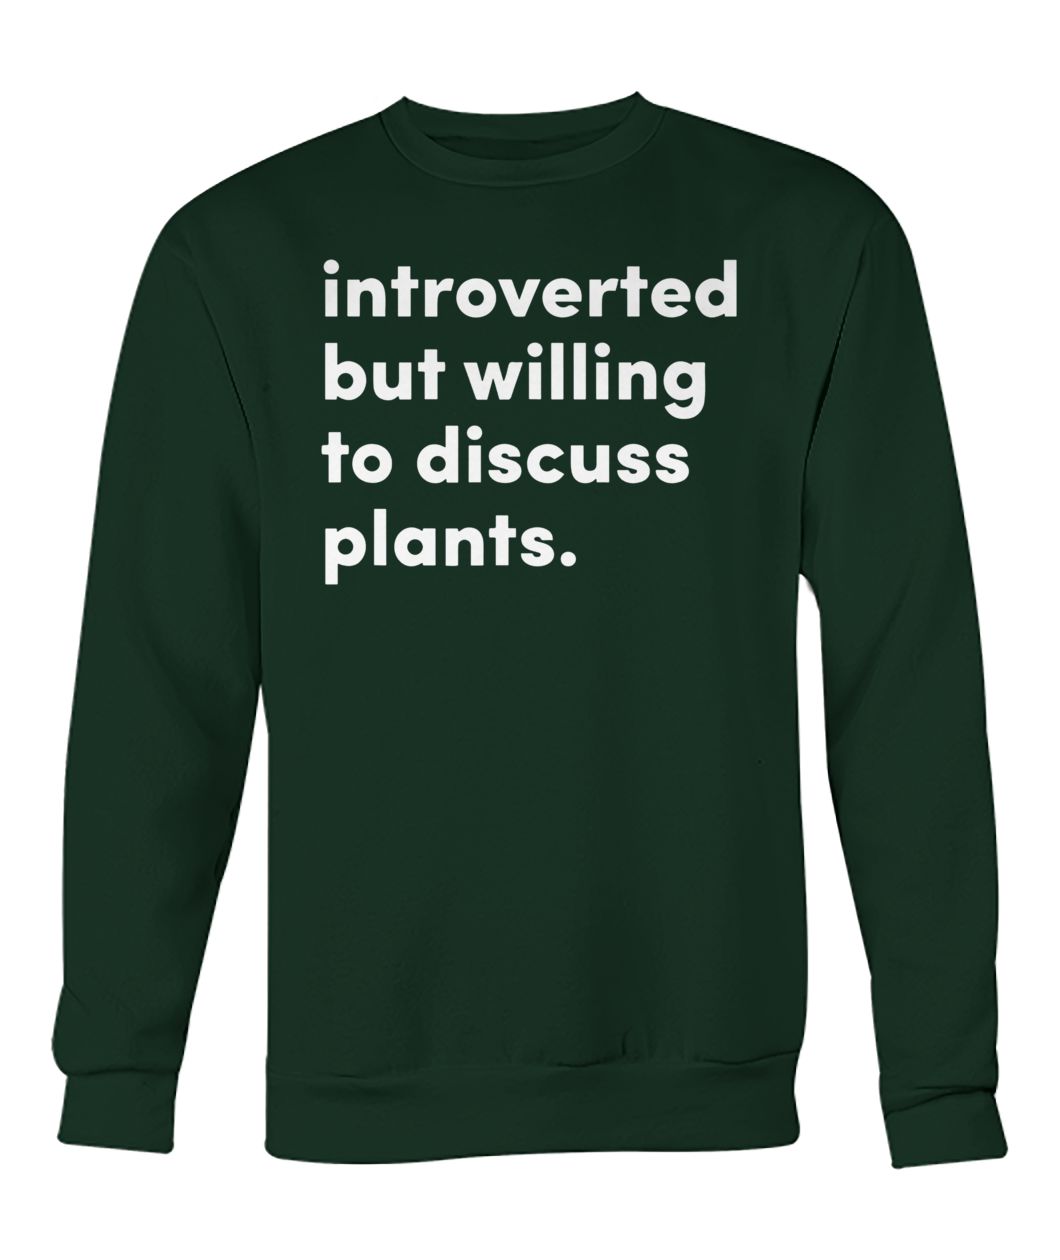 Introverted but willing to discuss plants crew neck sweatshirt